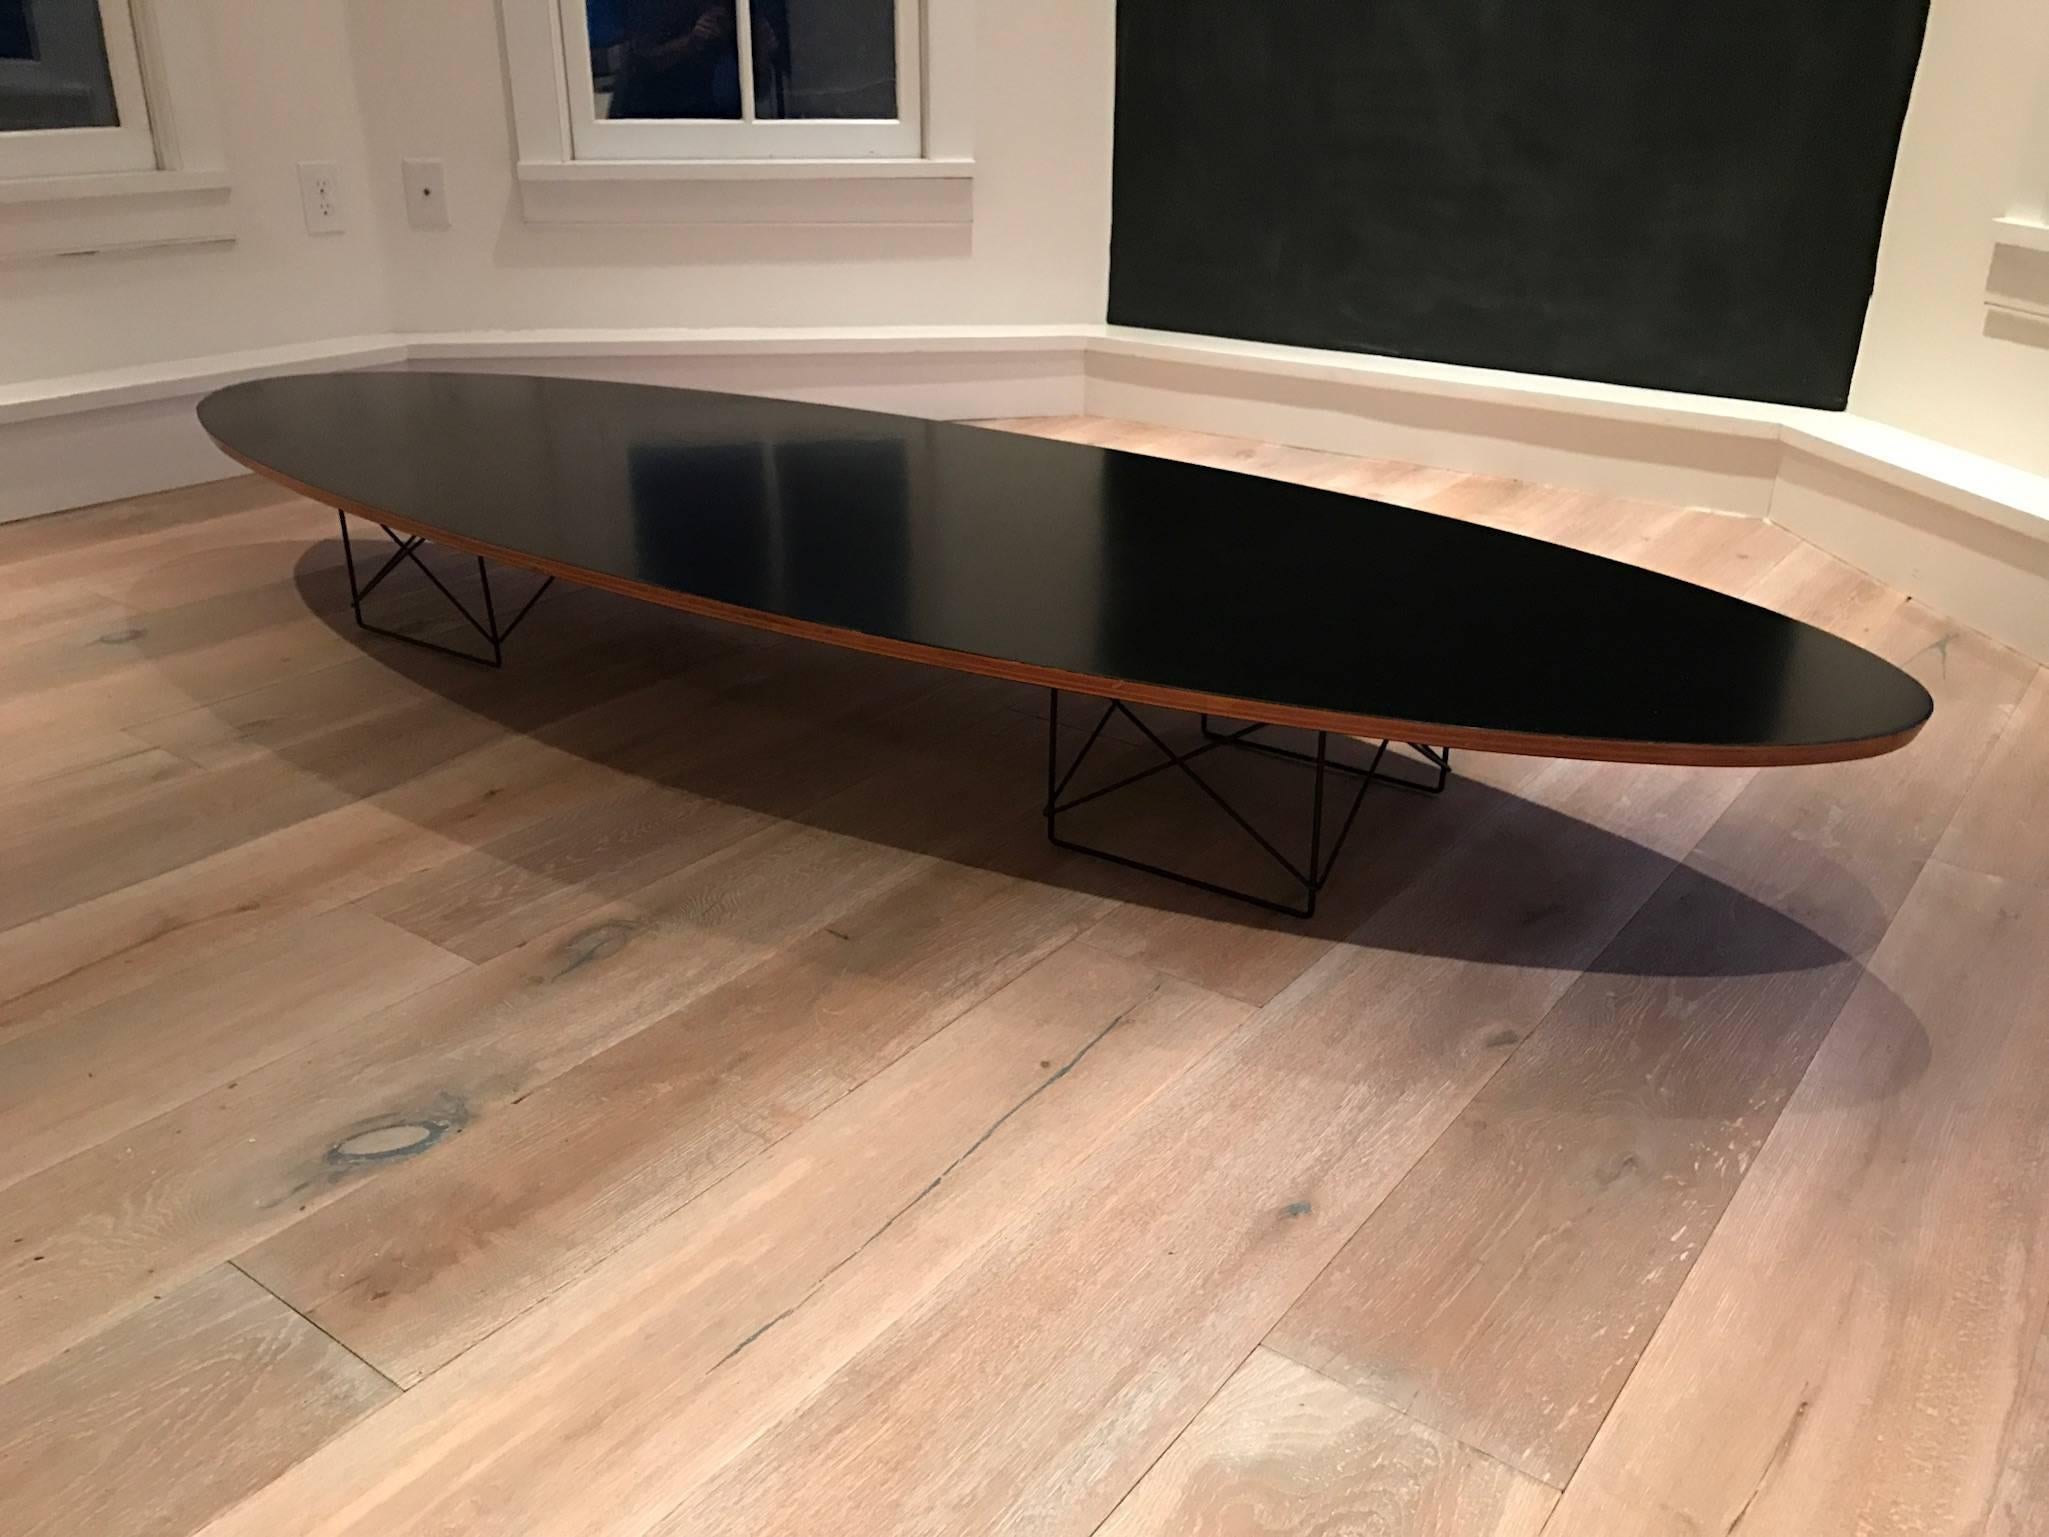 Eames ETR cocktail table with elliptical rod base. Early 1950s edition with rare black mica top.